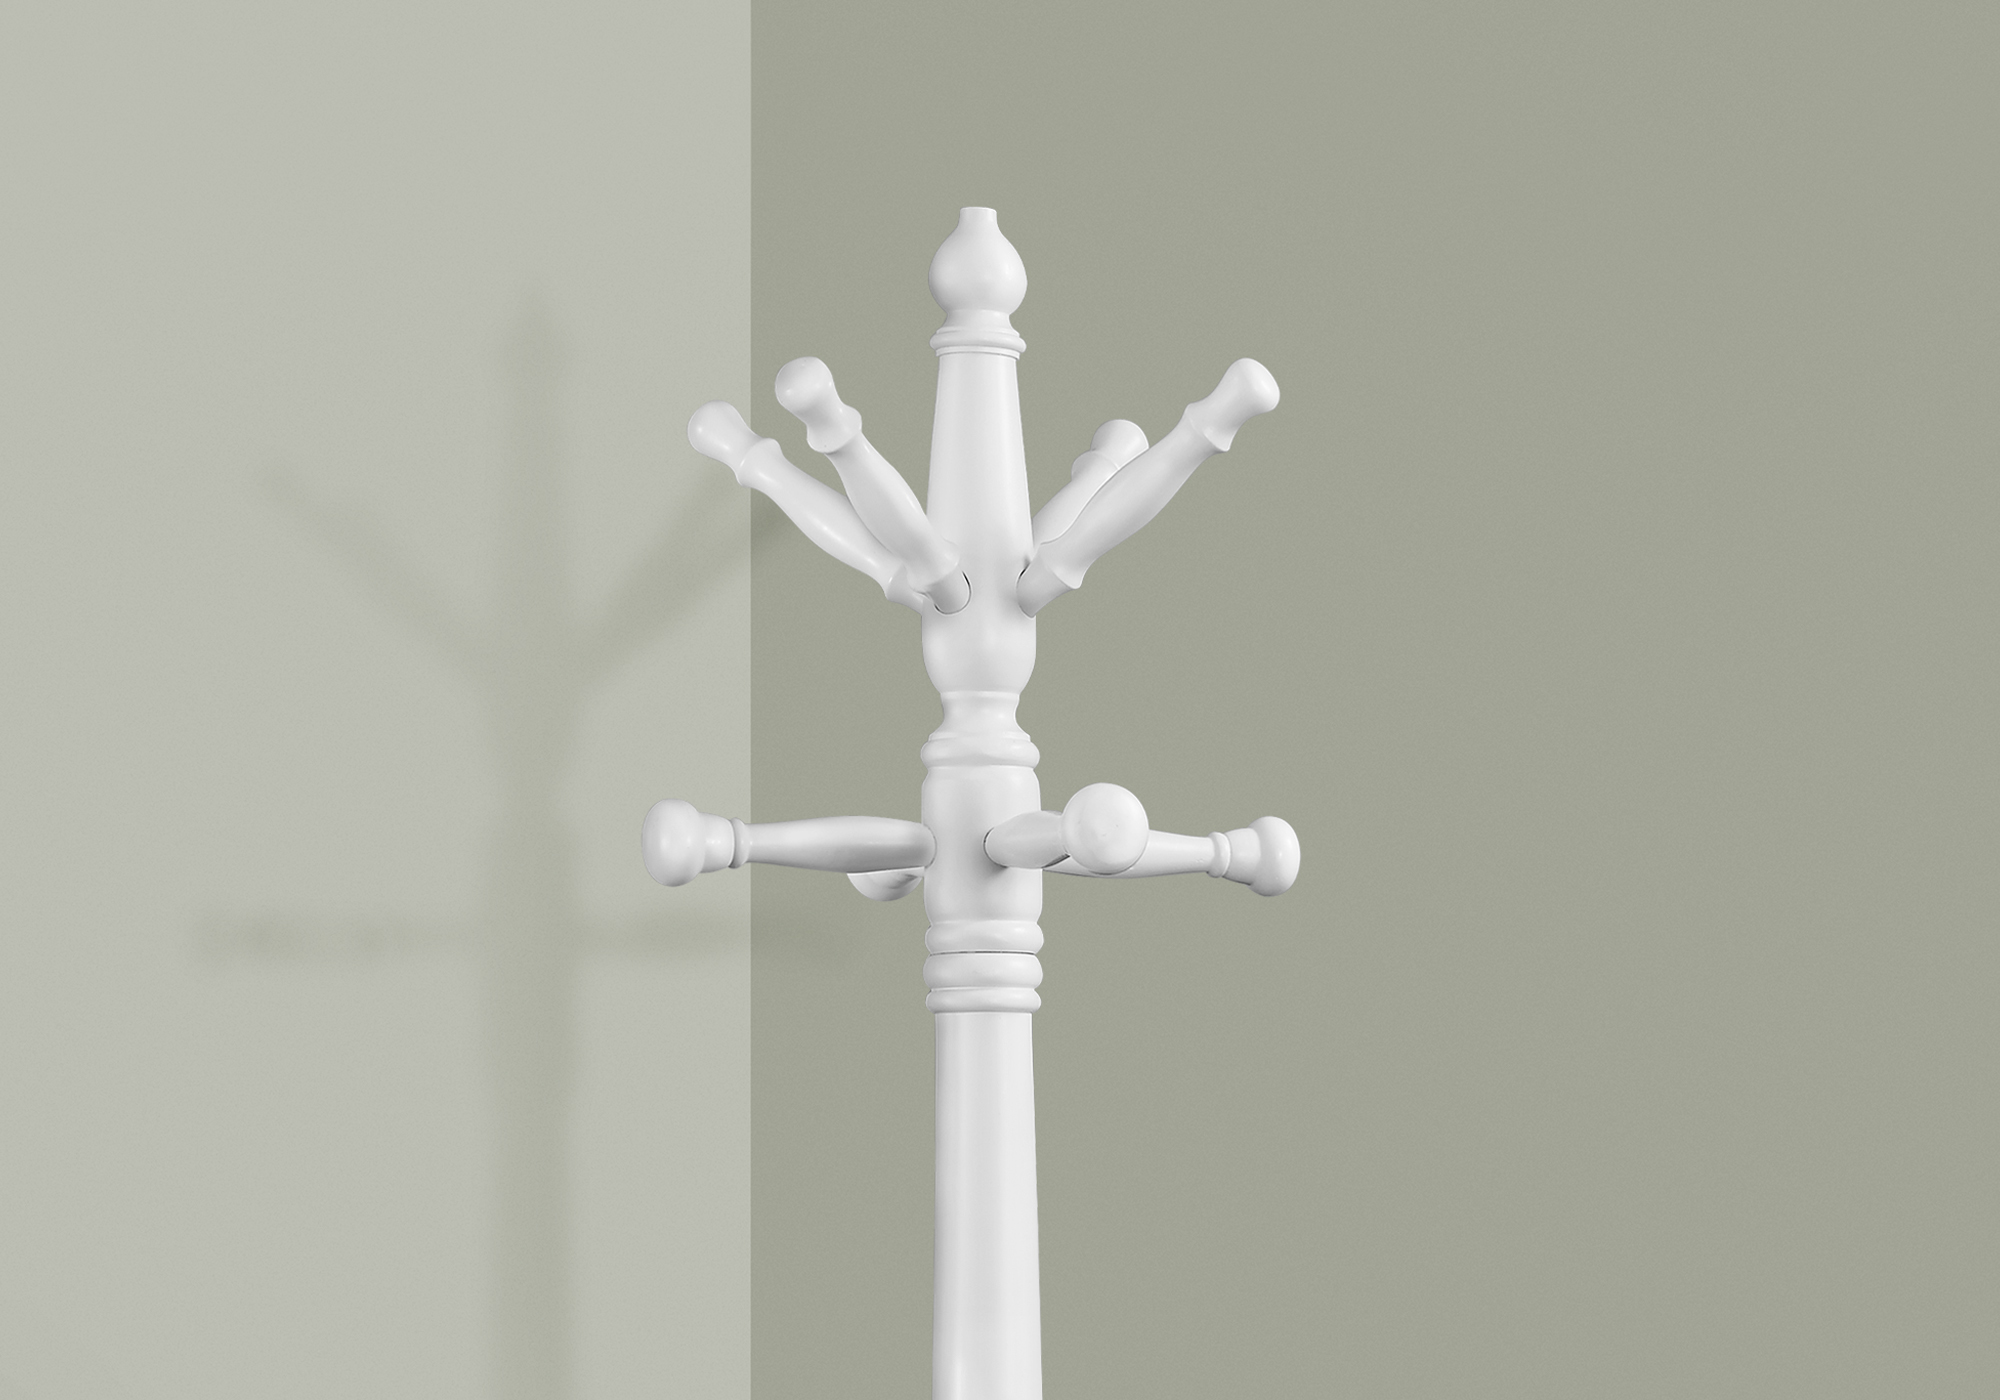 COAT RACK - 73"H / ANTIQUE WHITE WOOD TRADITIONAL STYLE